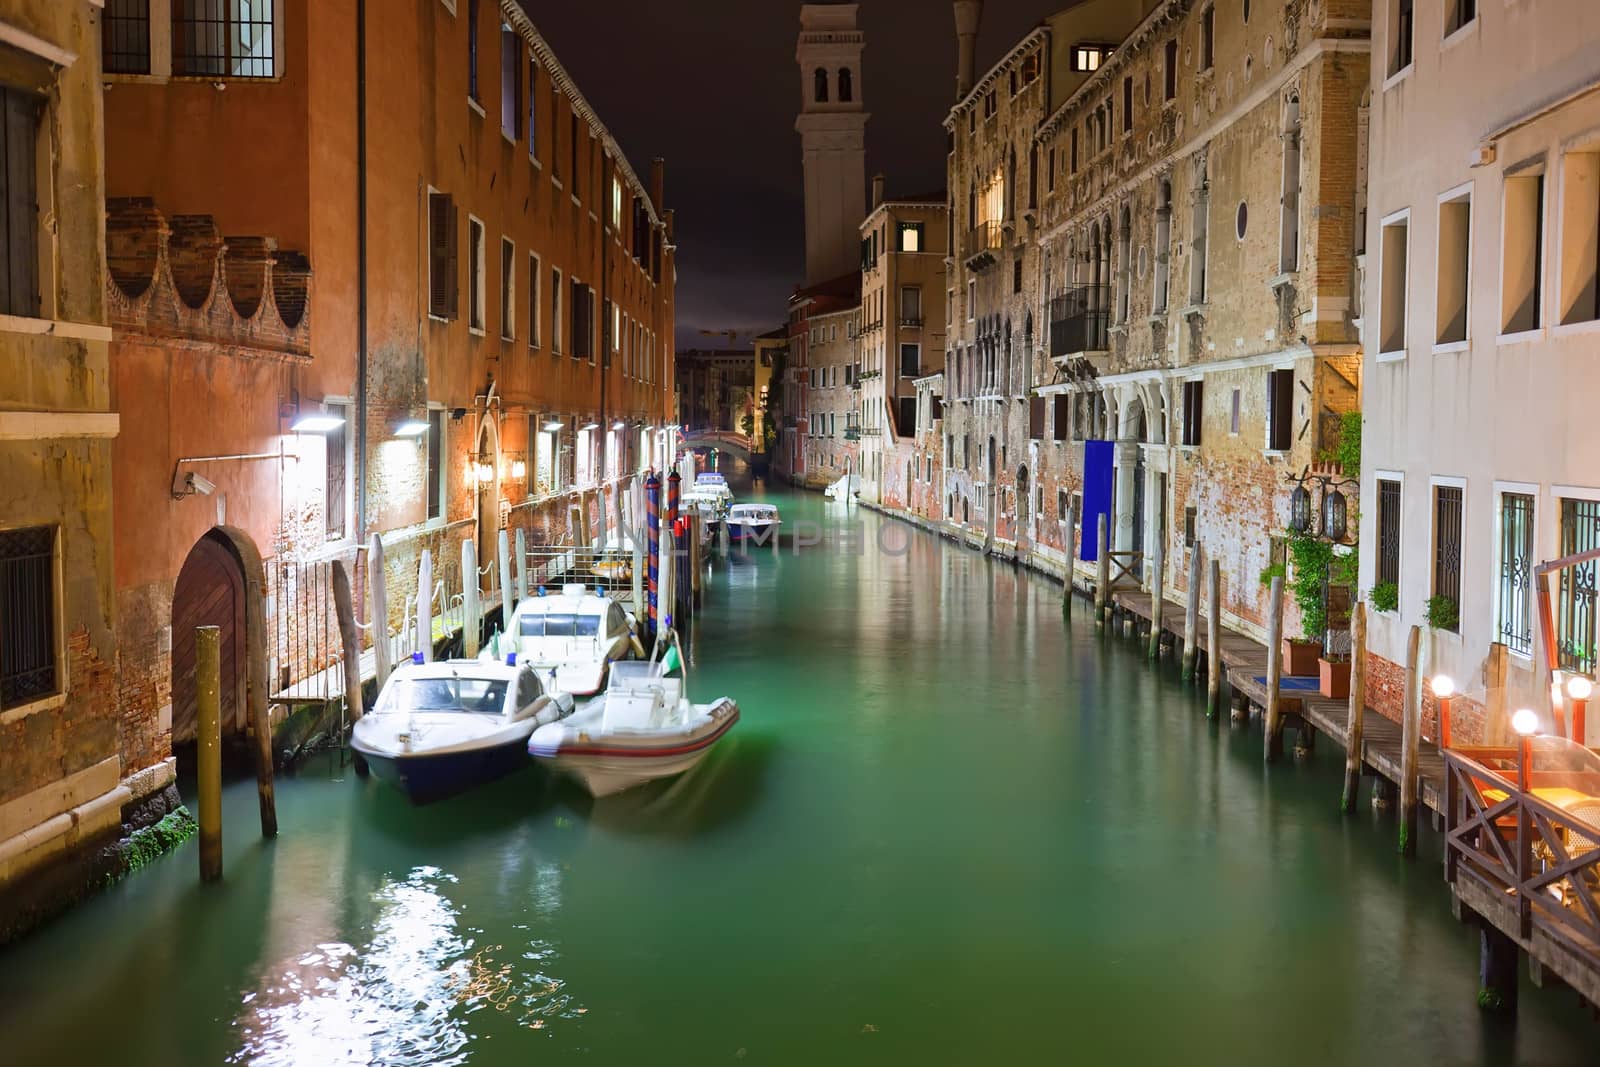 Venice at night by sailorr